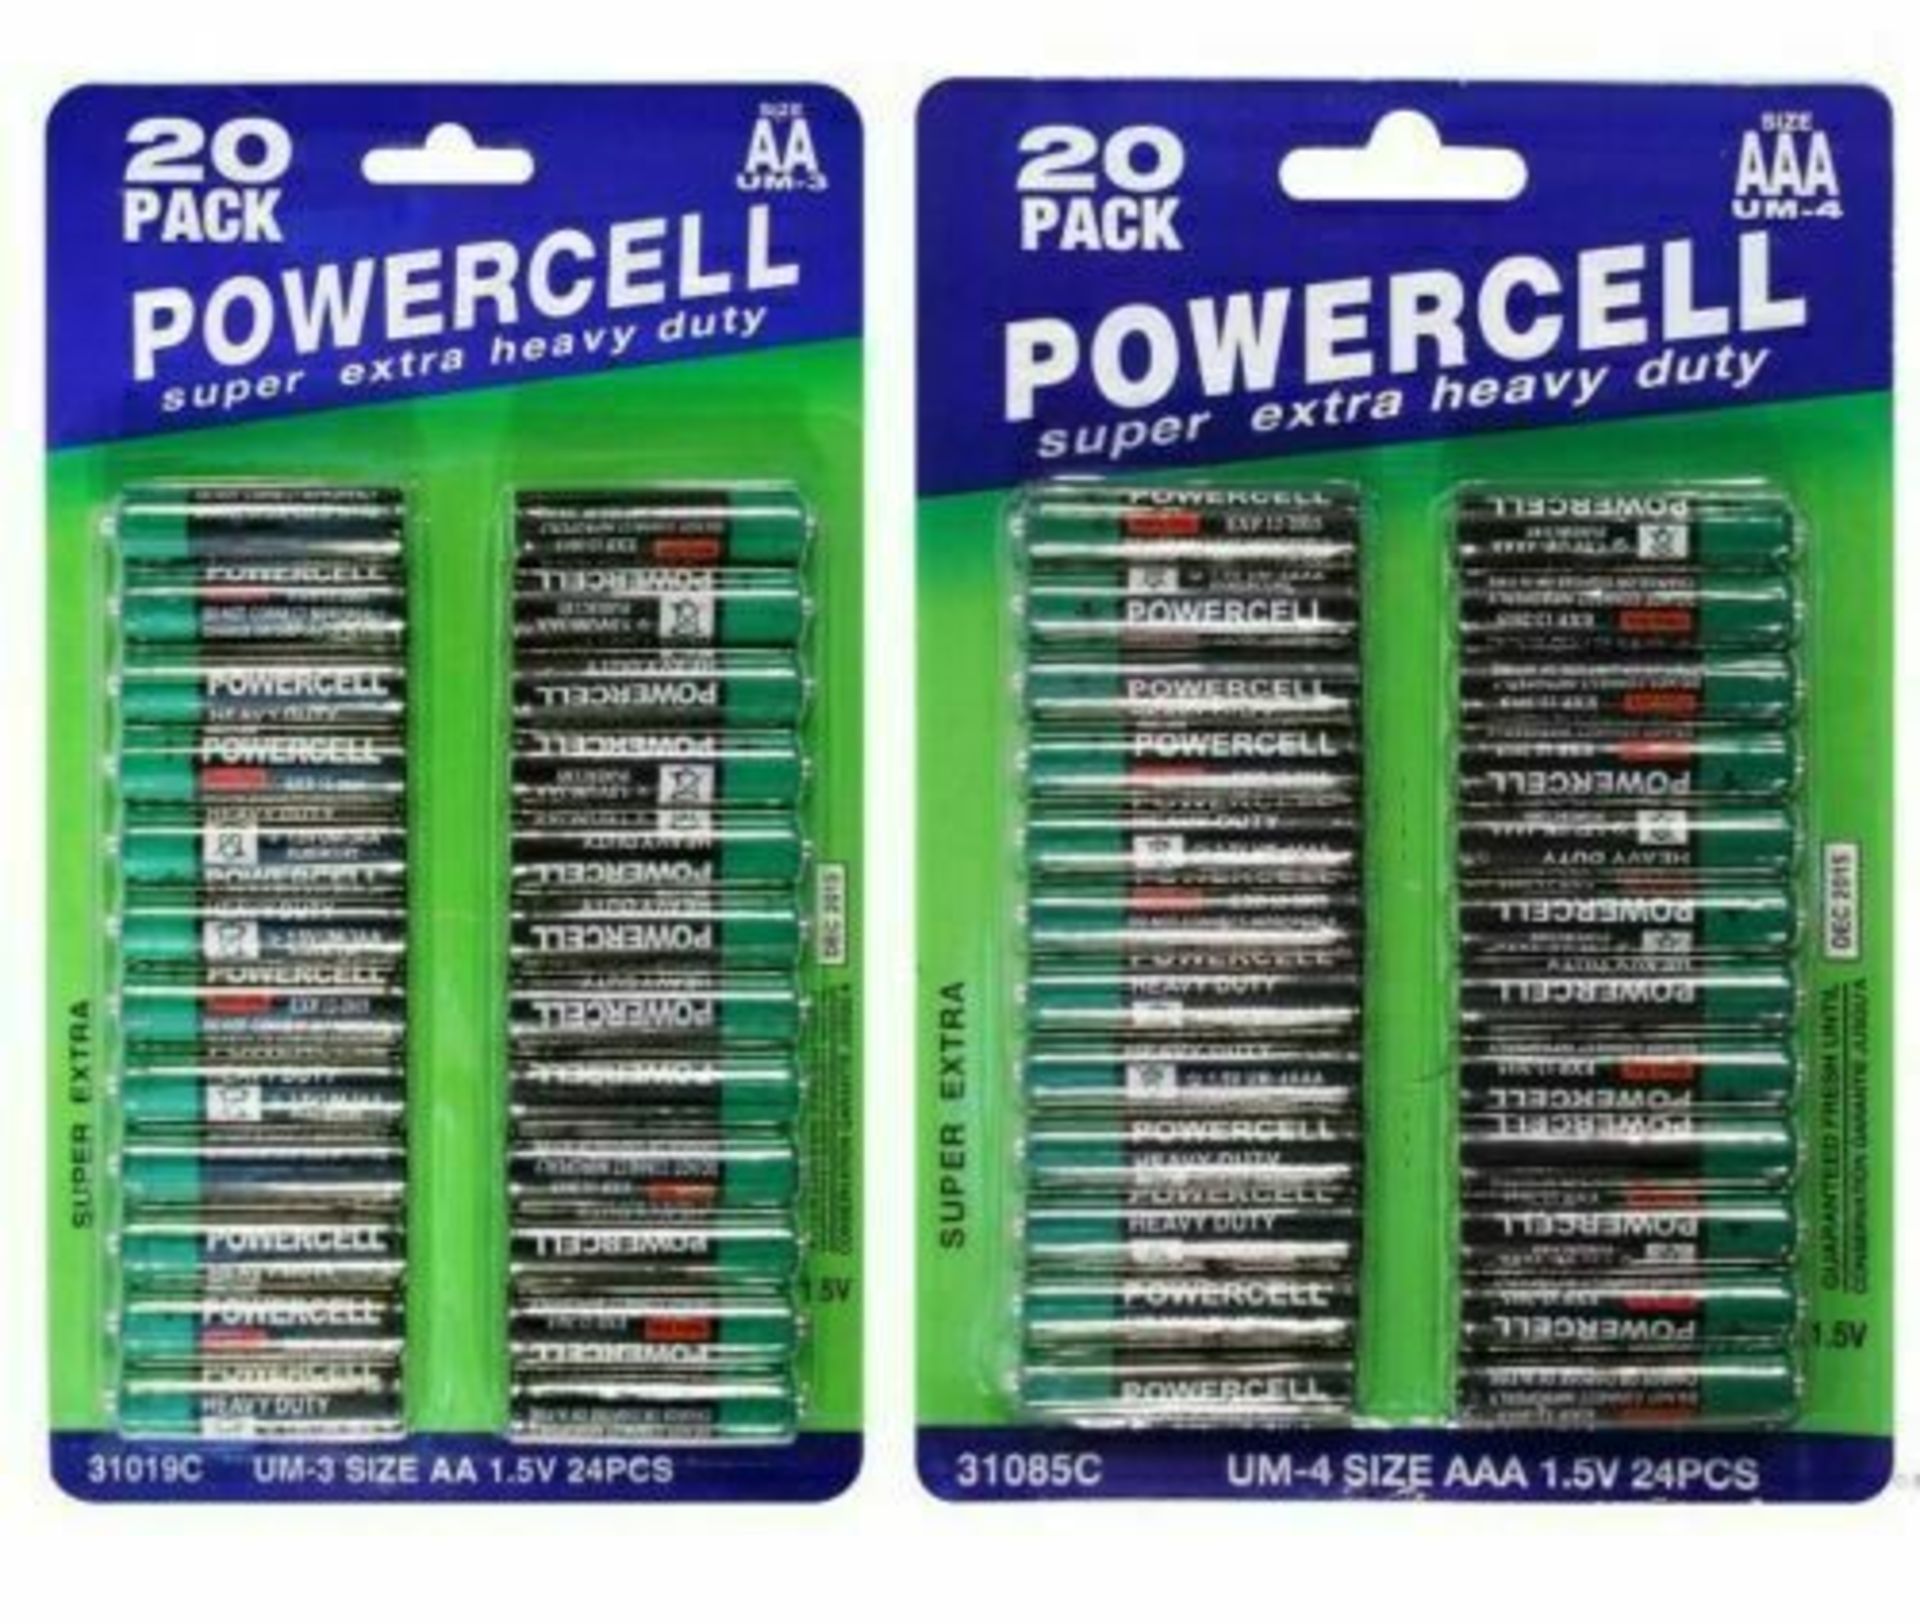 x2 Packs Of 20 Powercell AA Batteries